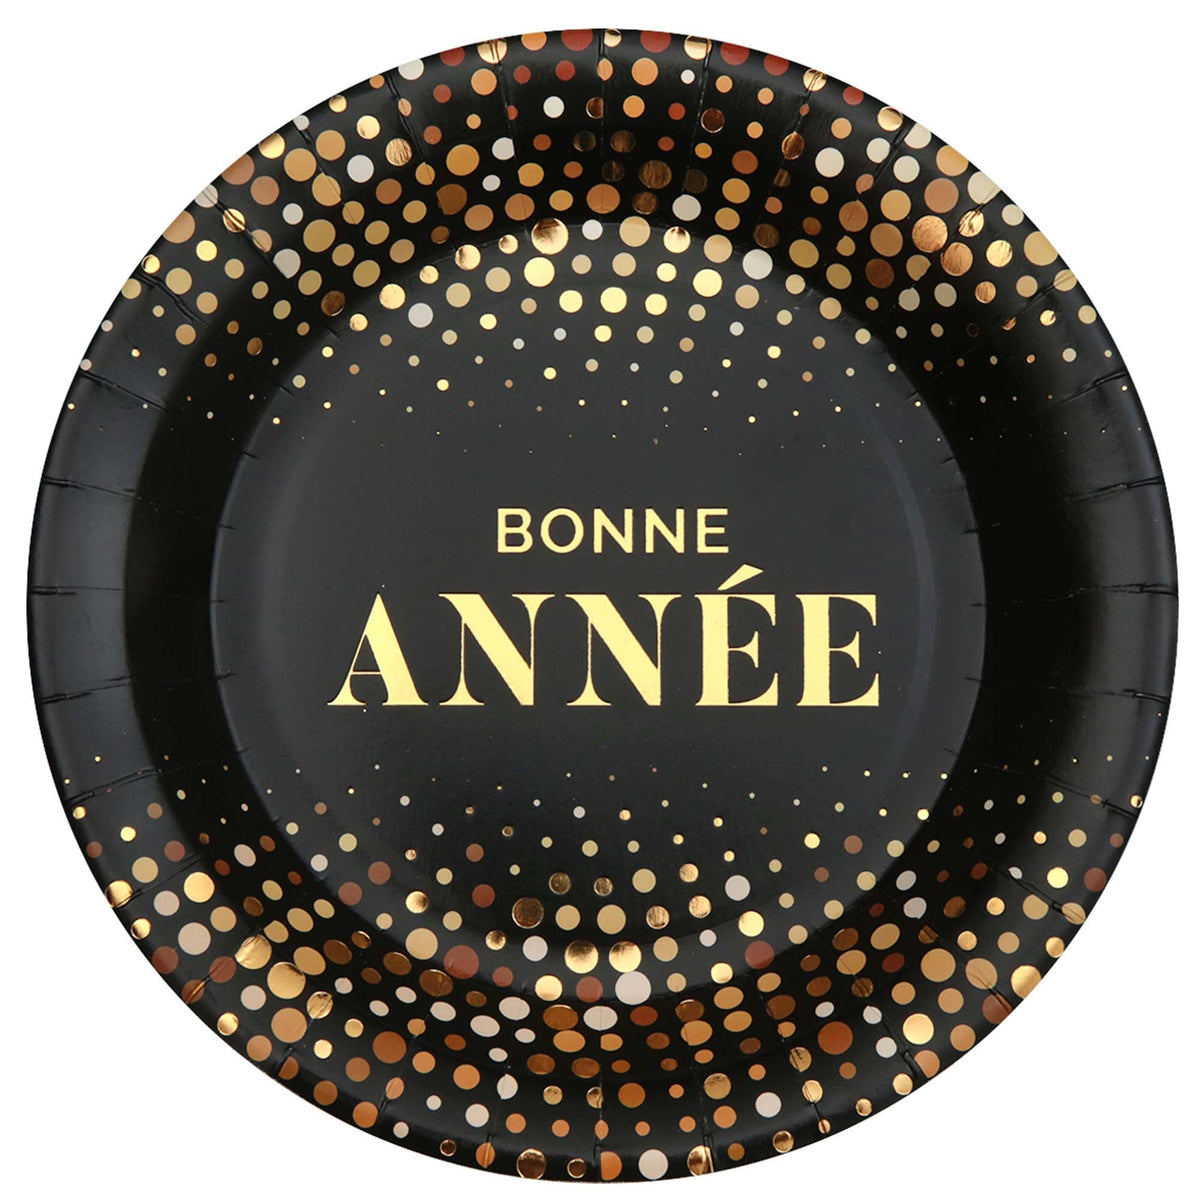 SANTEX New Year "Bonne Année" Large Round Lunch Paper Plates, 9 Inches, 10 Count